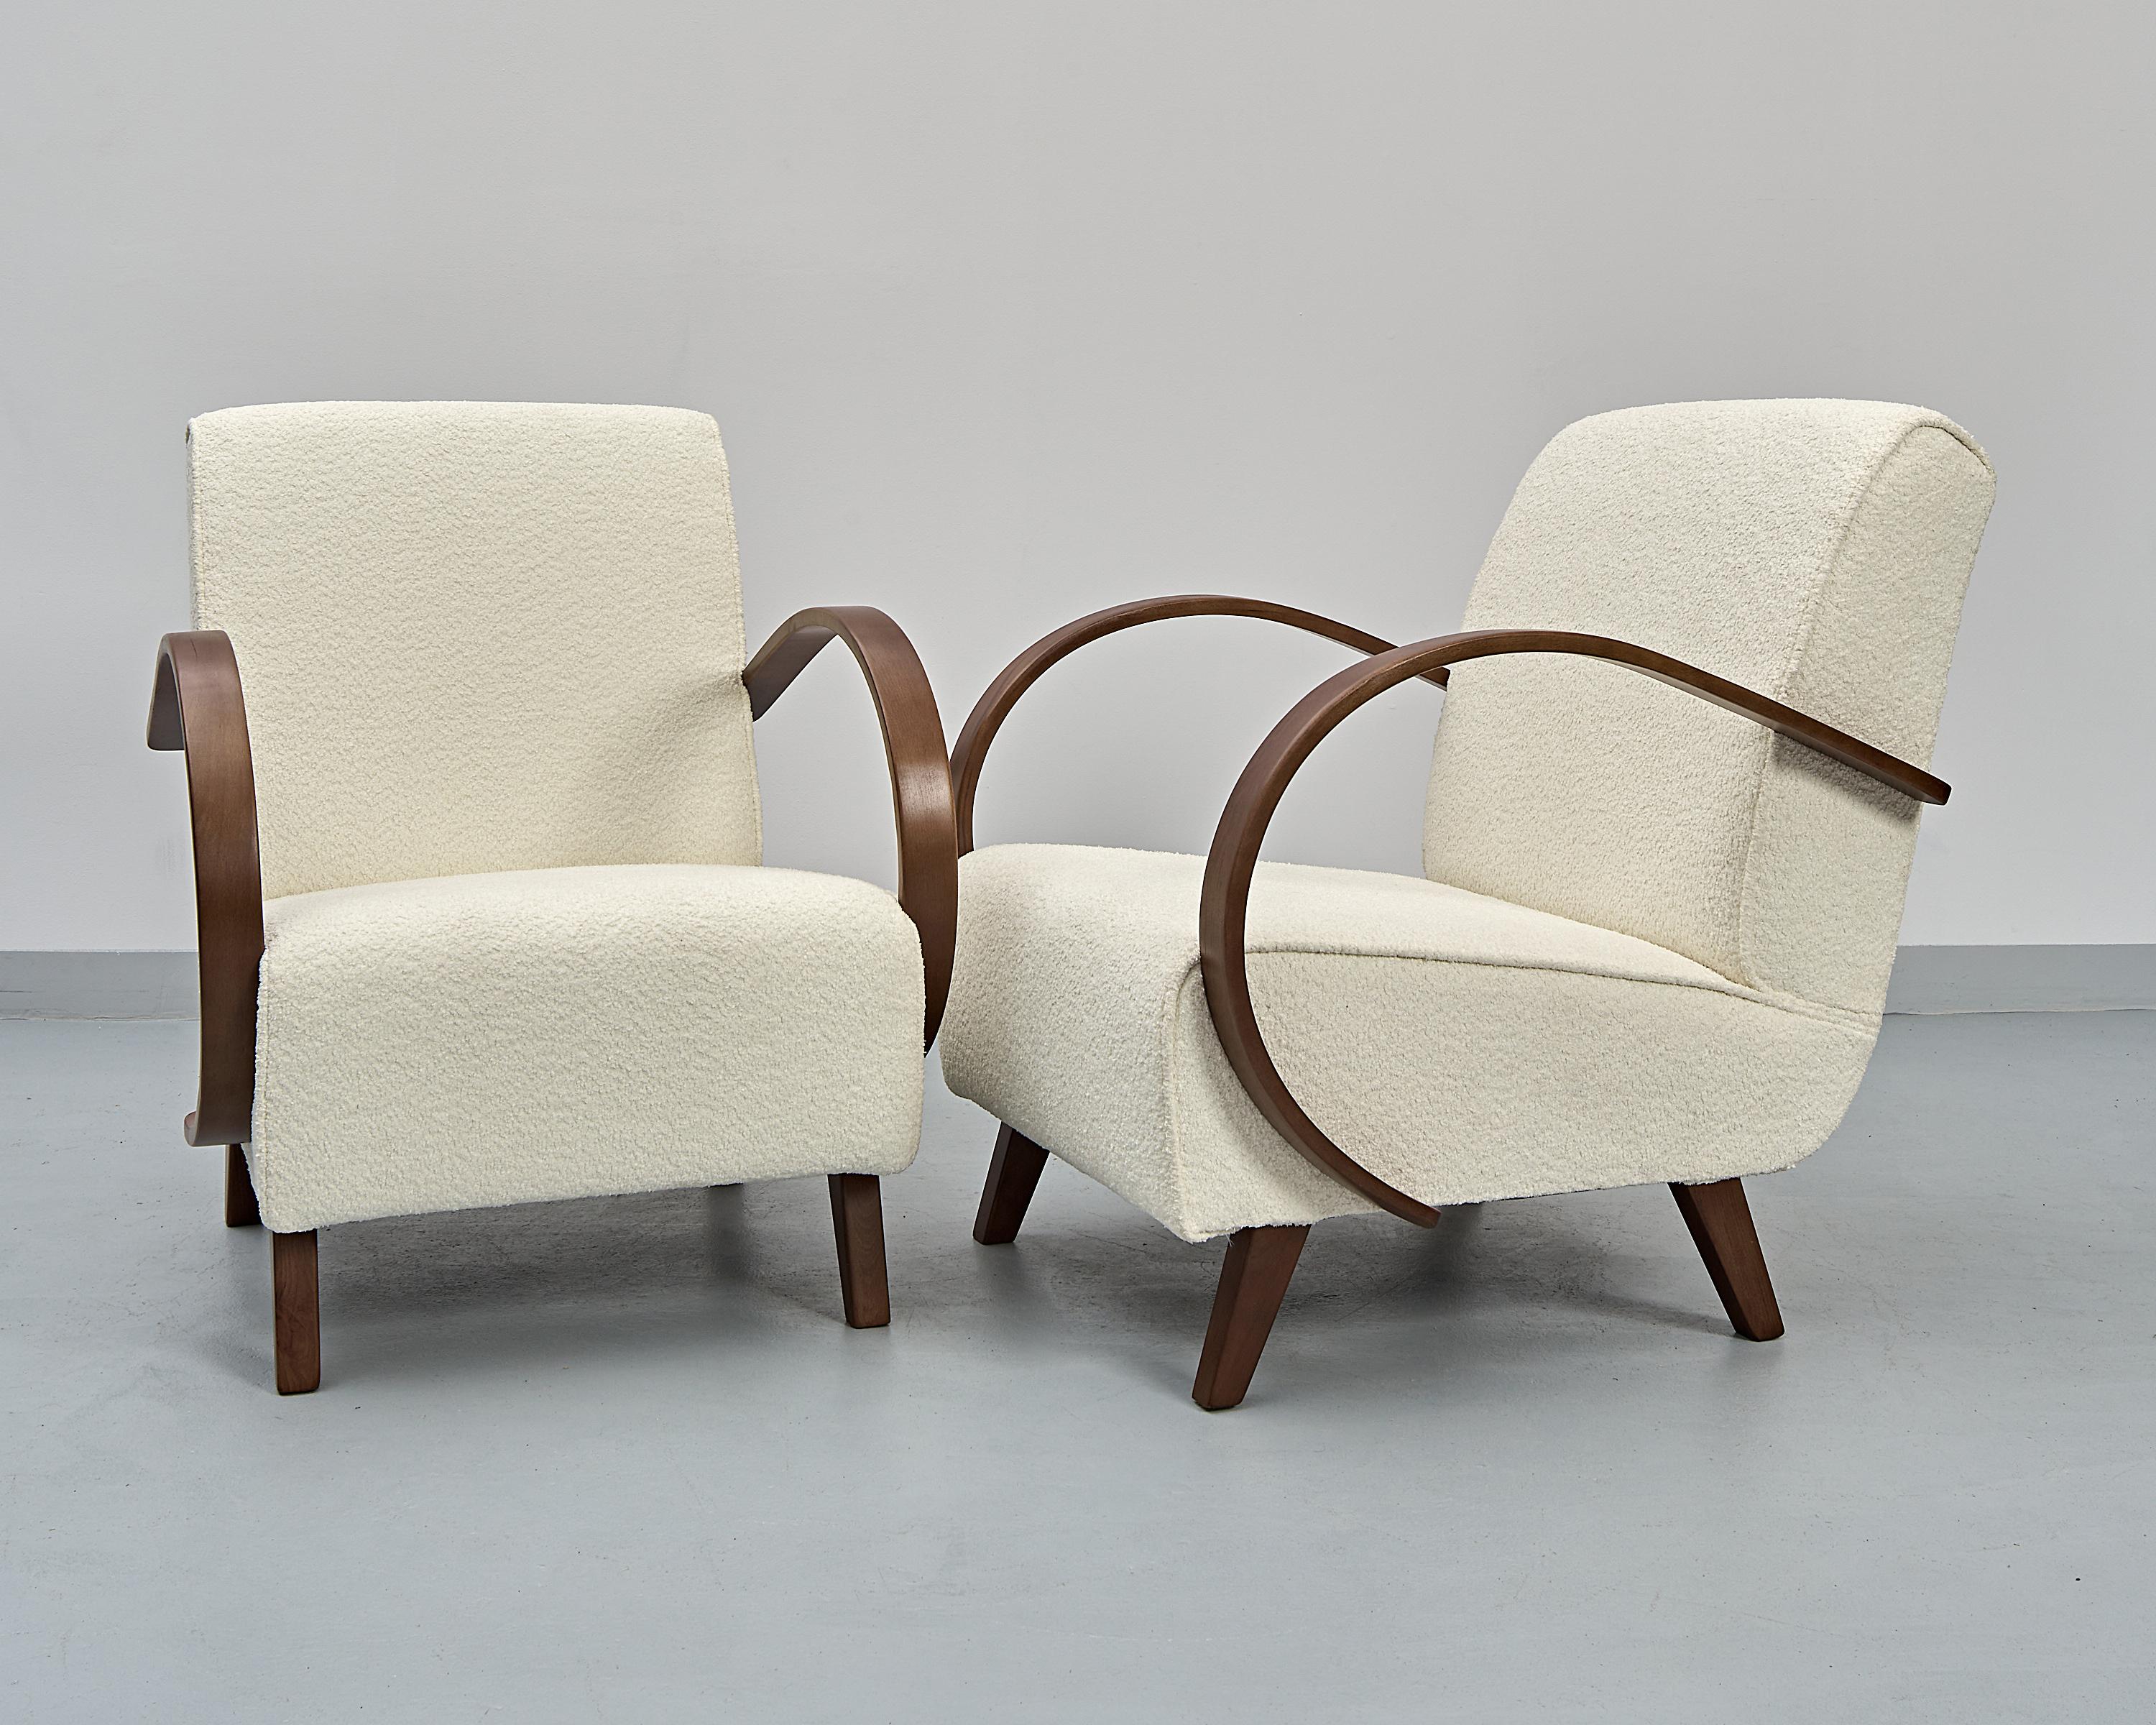 Set of 2 Type C armchairs designed by the famous czech designer Jindřich Halabala. Produced during the 1930's in former Czechoslovakia.

Oak bentwood armrests cleaned, varnished, lacquered.

Seating recreated and covered in high quality italian